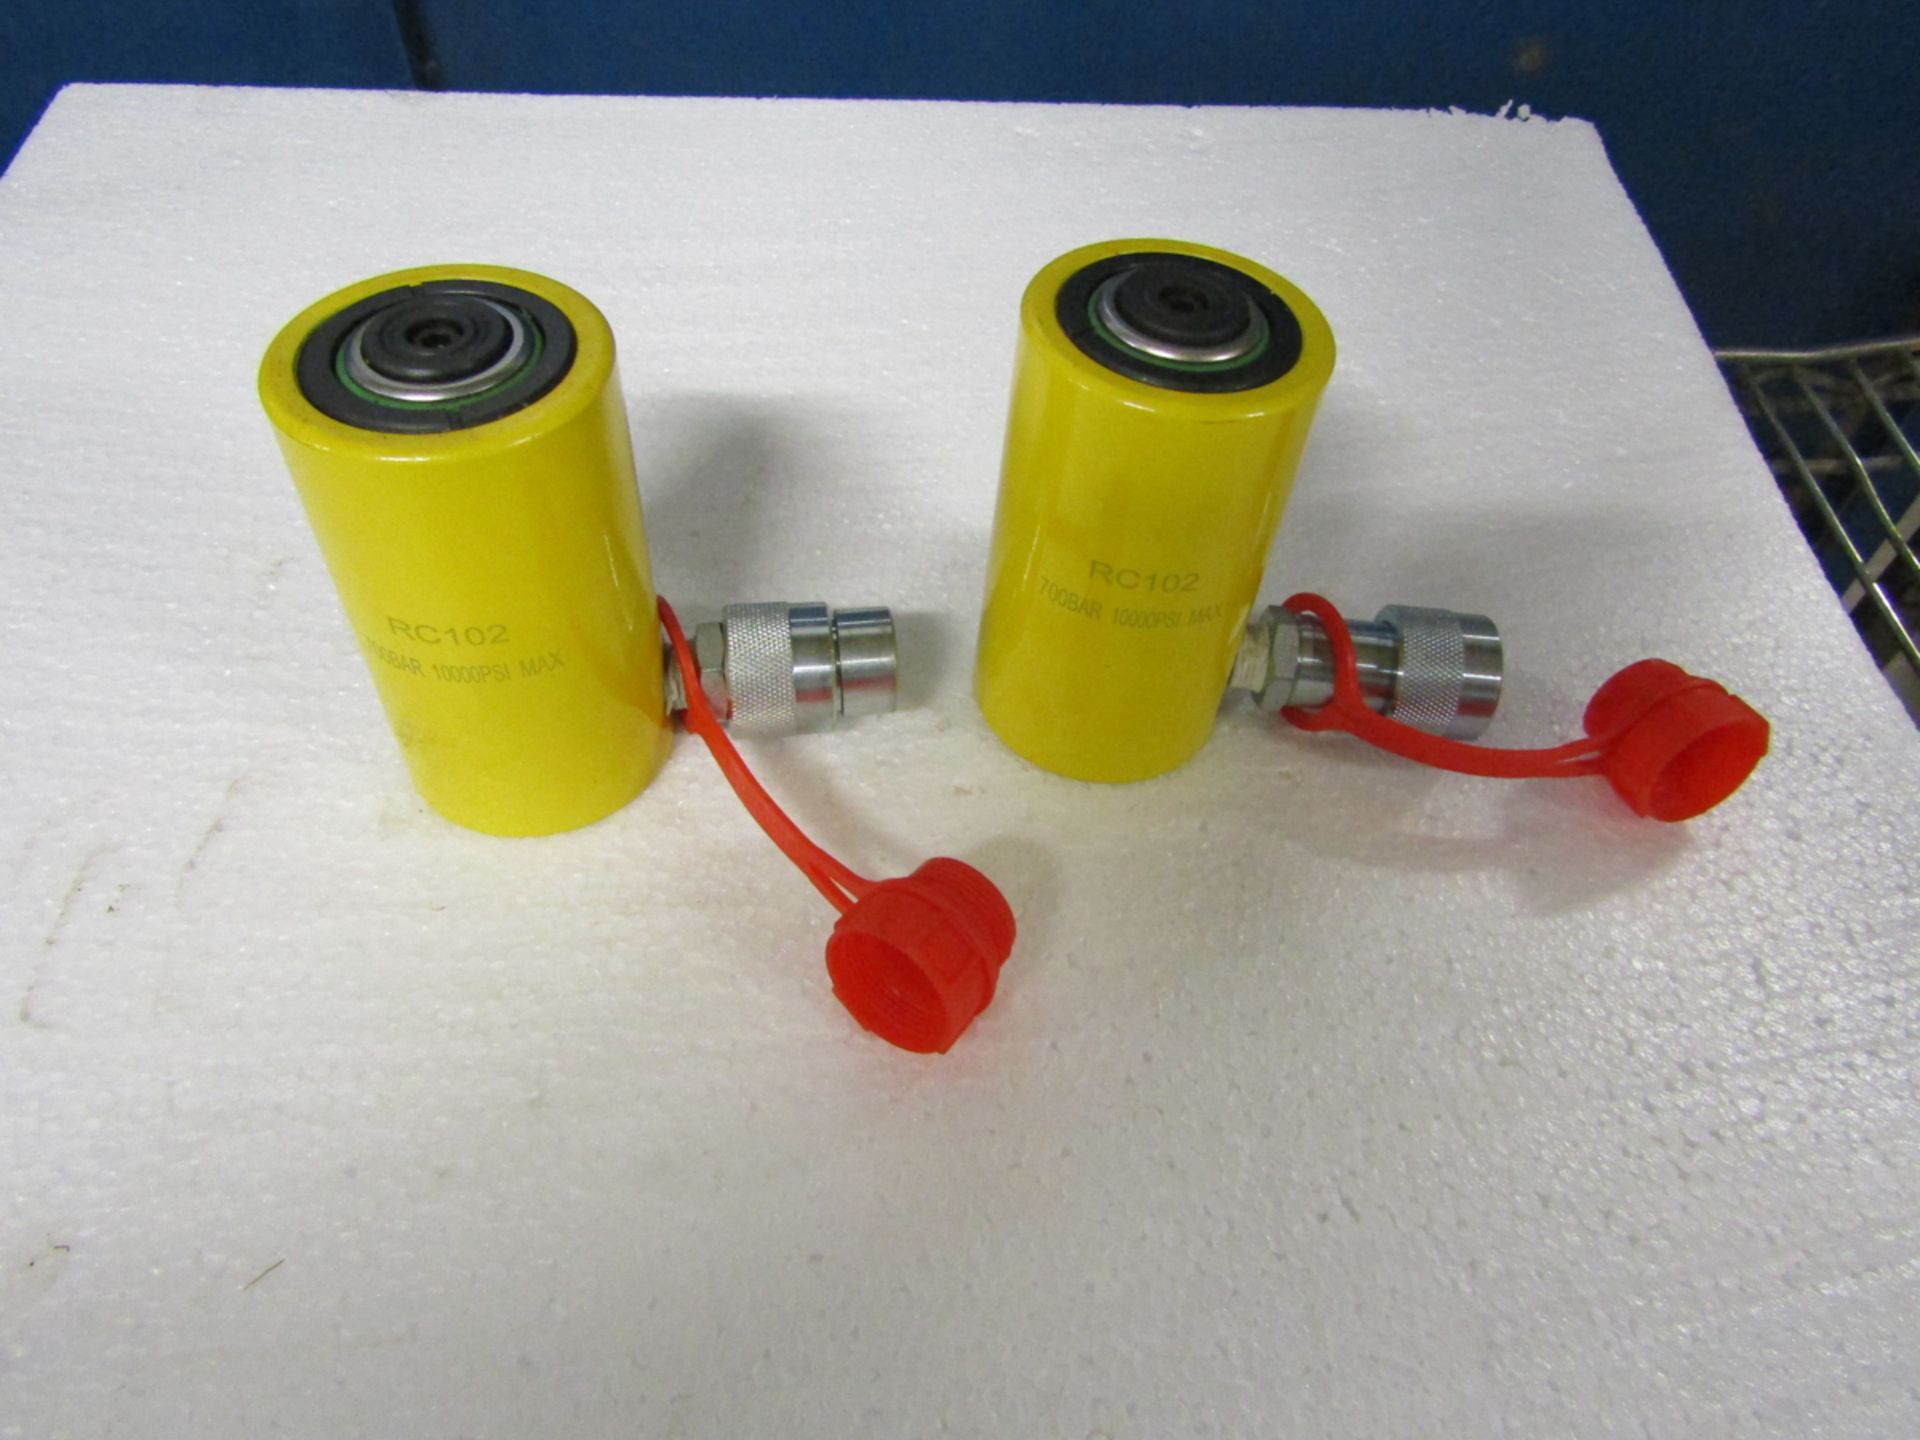 "NEW" LOT OF 2 (2 UNITS) RC-102, 10 TON HYDRAULIC JACK WITH 2" STROKE TYPE CYLINDER (LOCATED IN